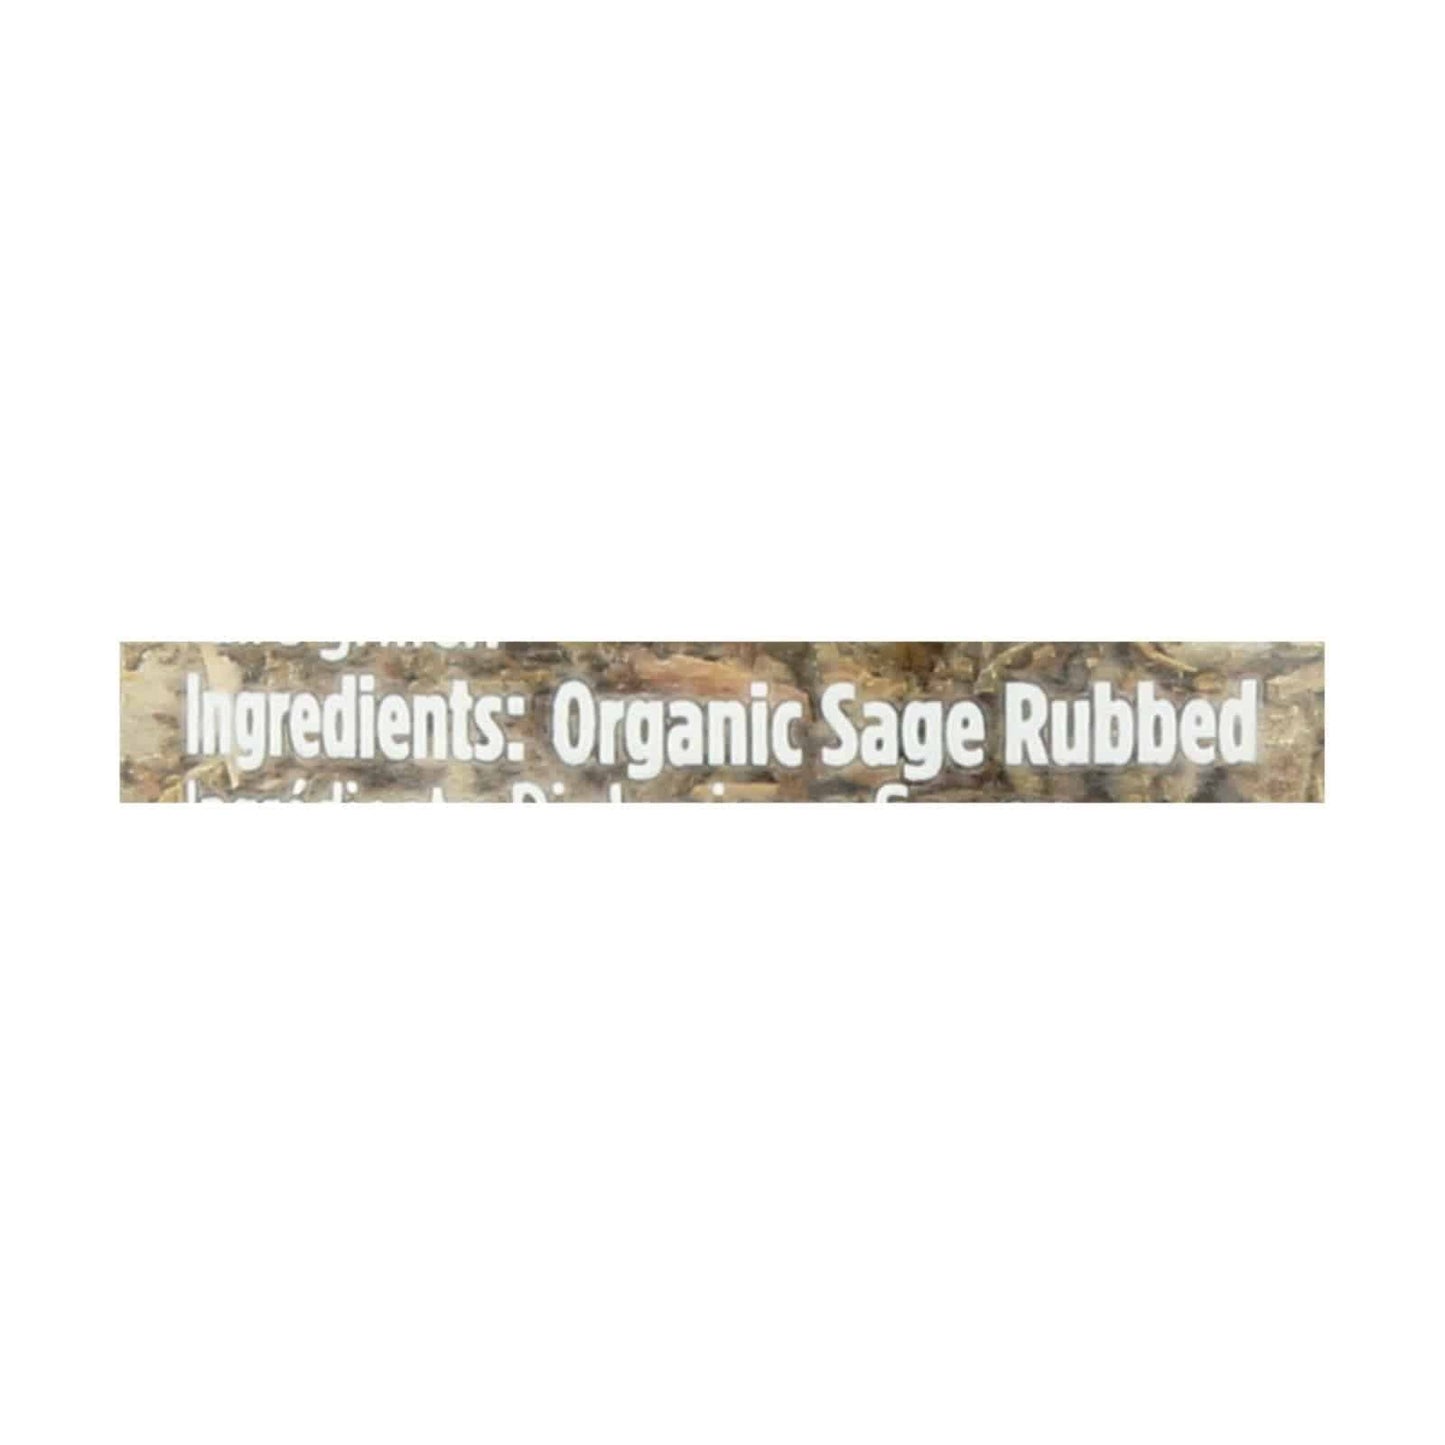 Spicely Organics - Organic Sage - Rubbed - Case Of 3 - 0.4 Oz. | OnlyNaturals.us